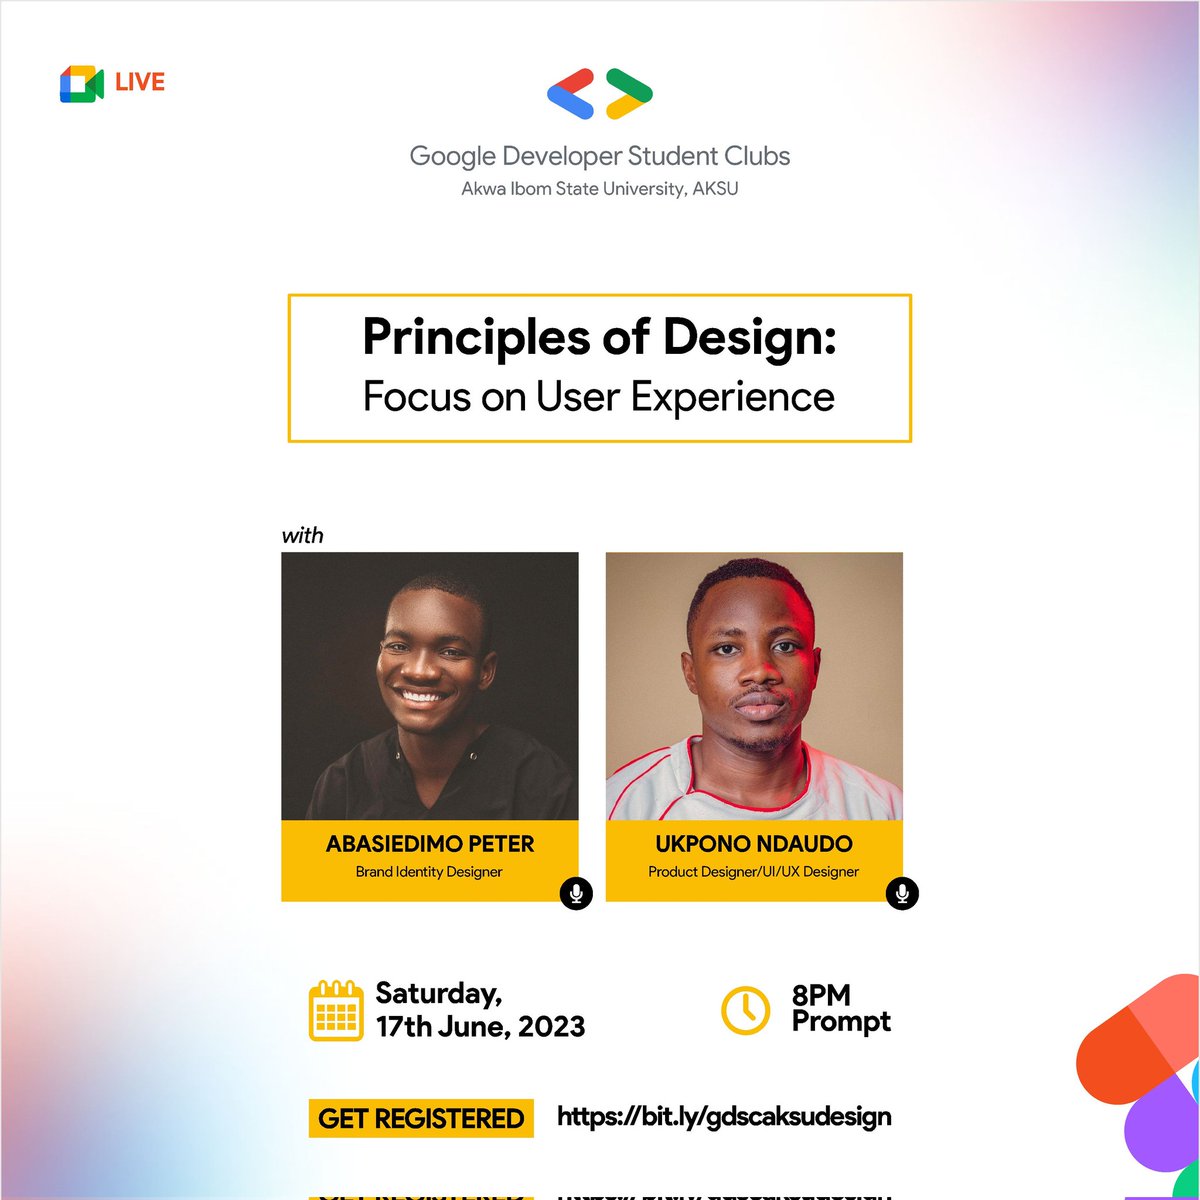 '🎙 Join me & Product Manager Ukpono Ndaudo for an exciting virtual event on June 17th, 8pm! 🌟 We'll be sharing insights on Design Principles & User Experience. Don't miss out! Click the link to join: bit.ly/gdscaksudesign

 #DesignPrinciples #UX #VirtualEvent'